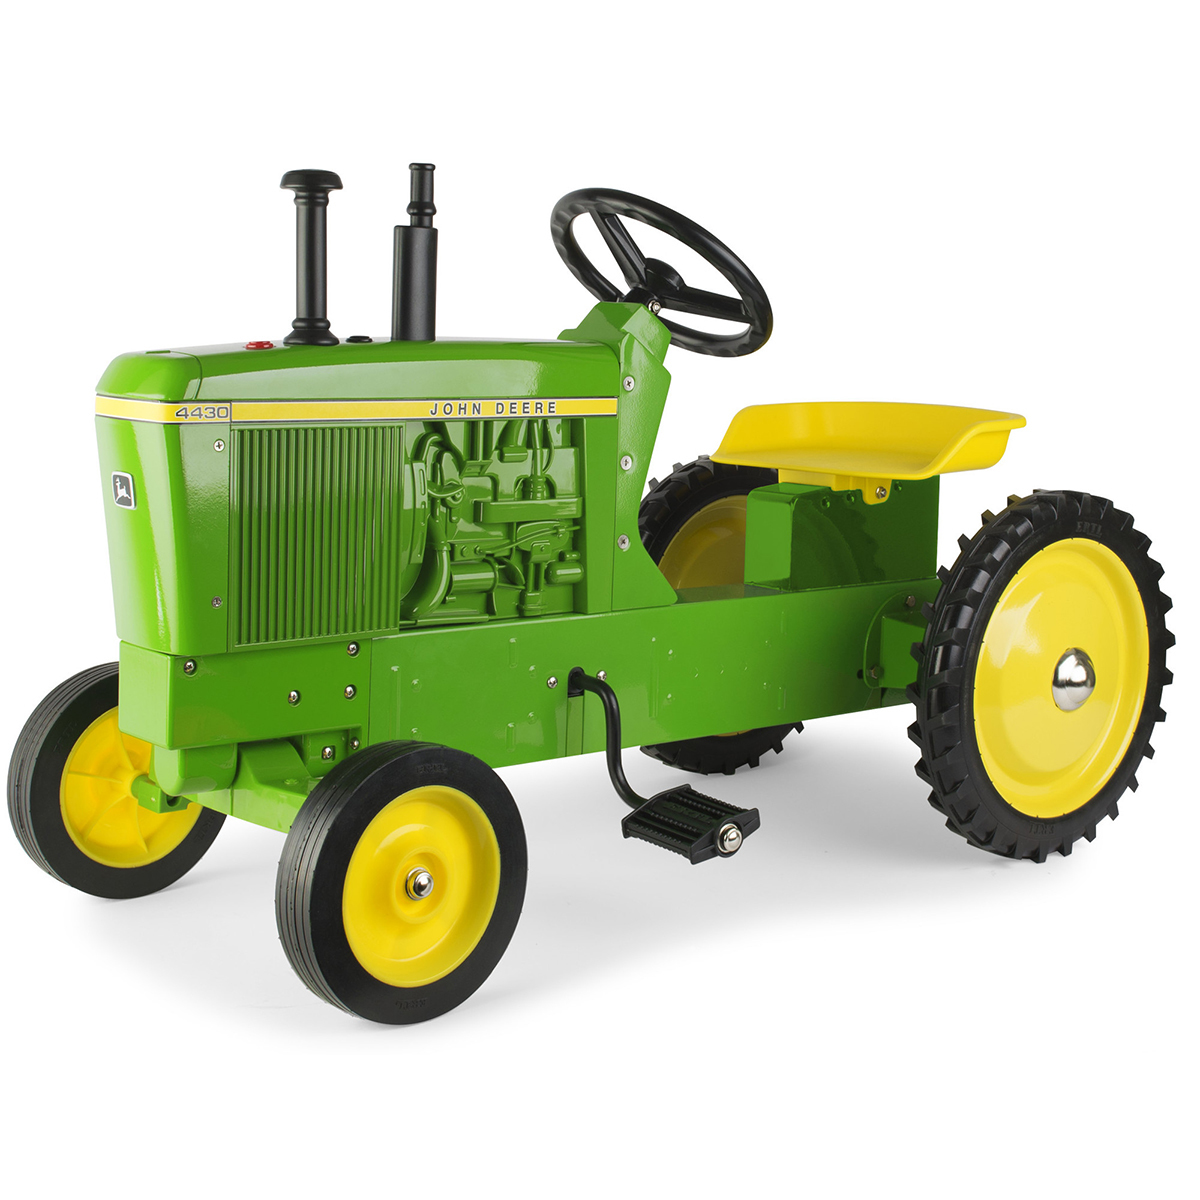 4430 Pedal Tractor